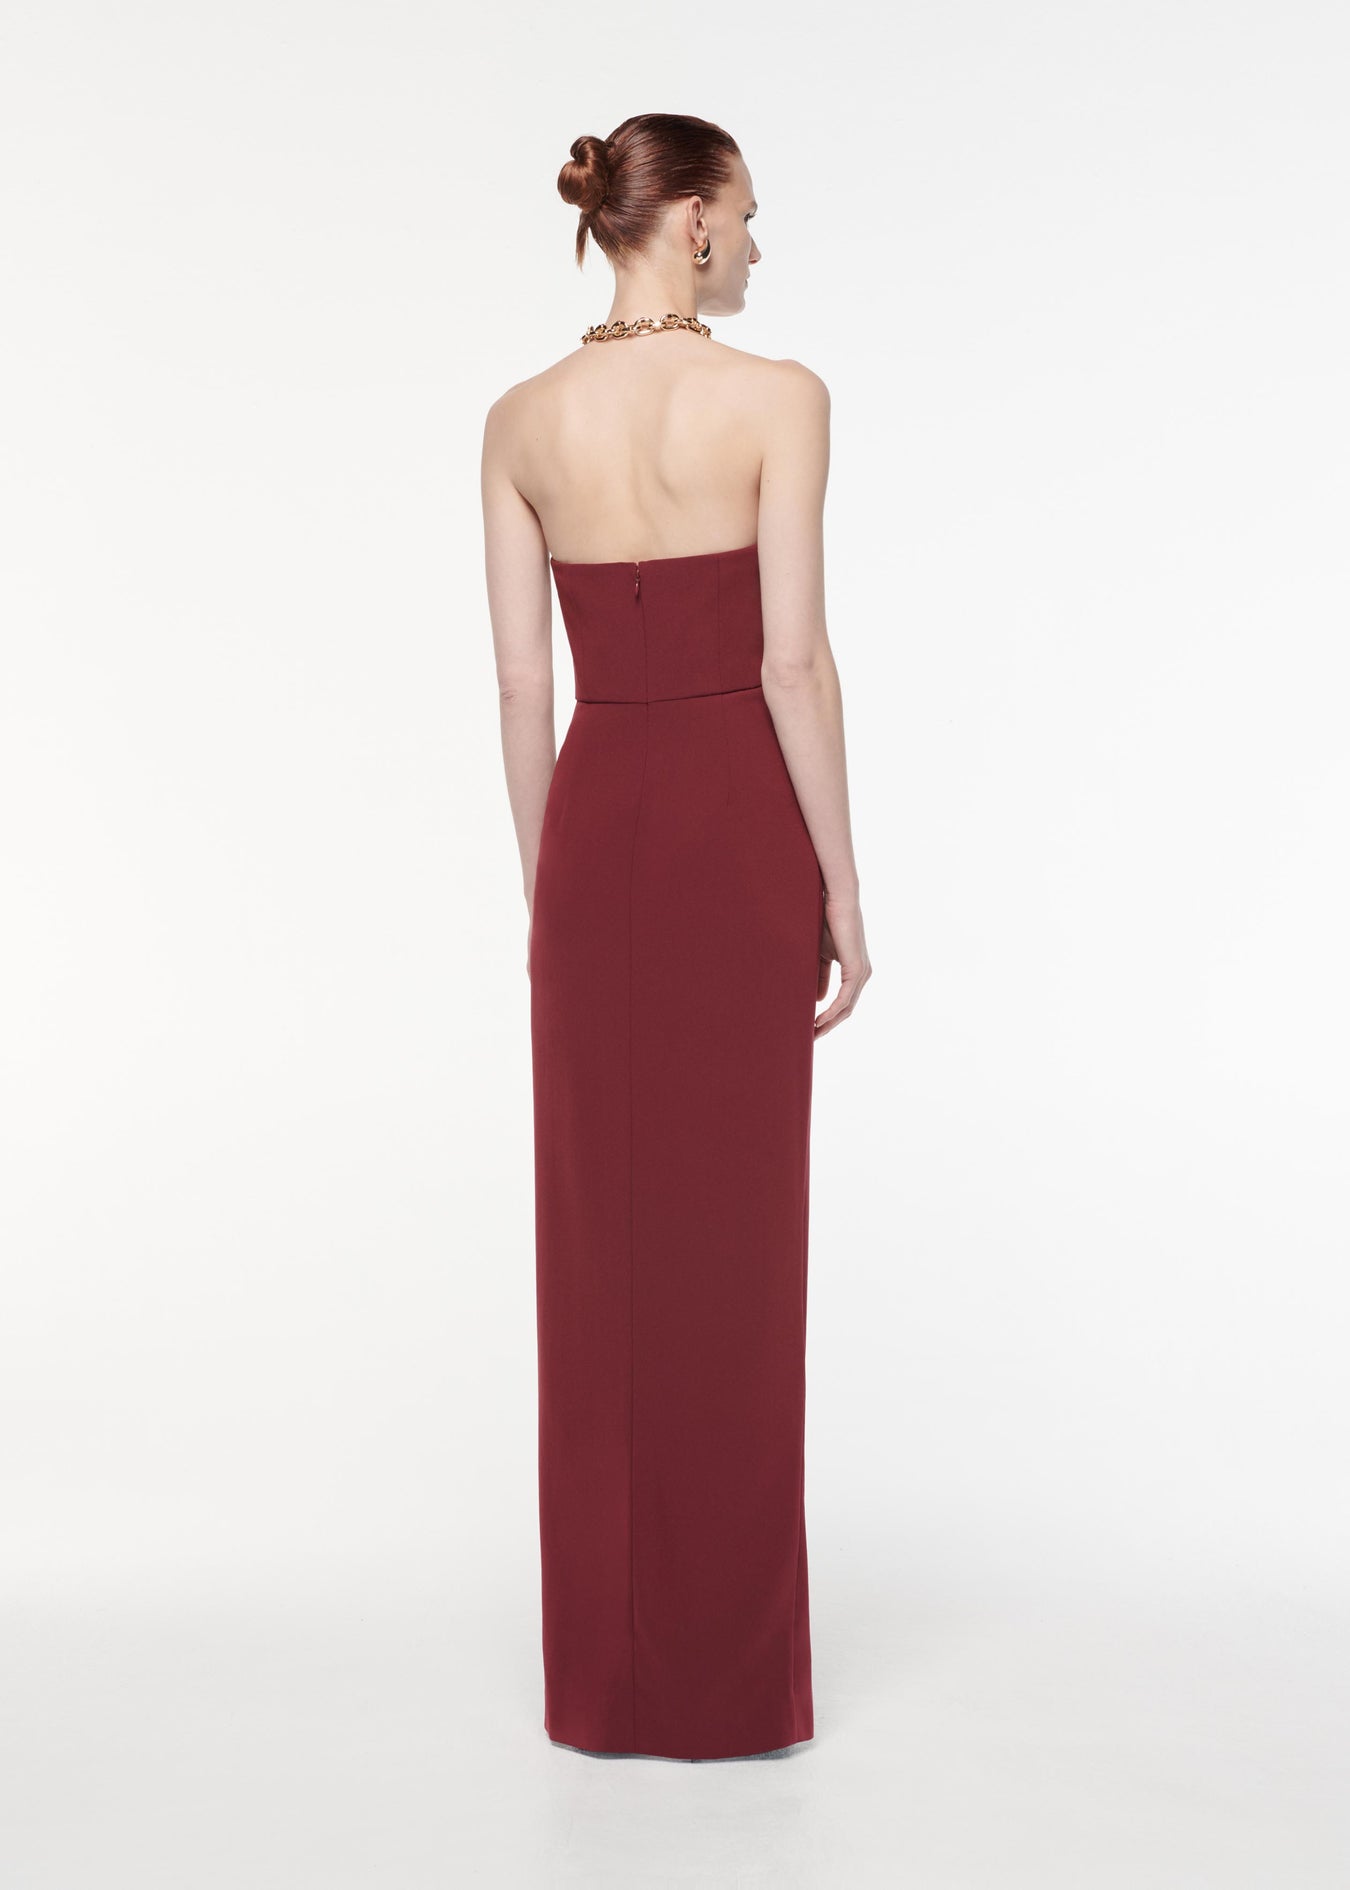 A photograph of a woman wearing a Strapless Satin Crepe Gown in Burgundy